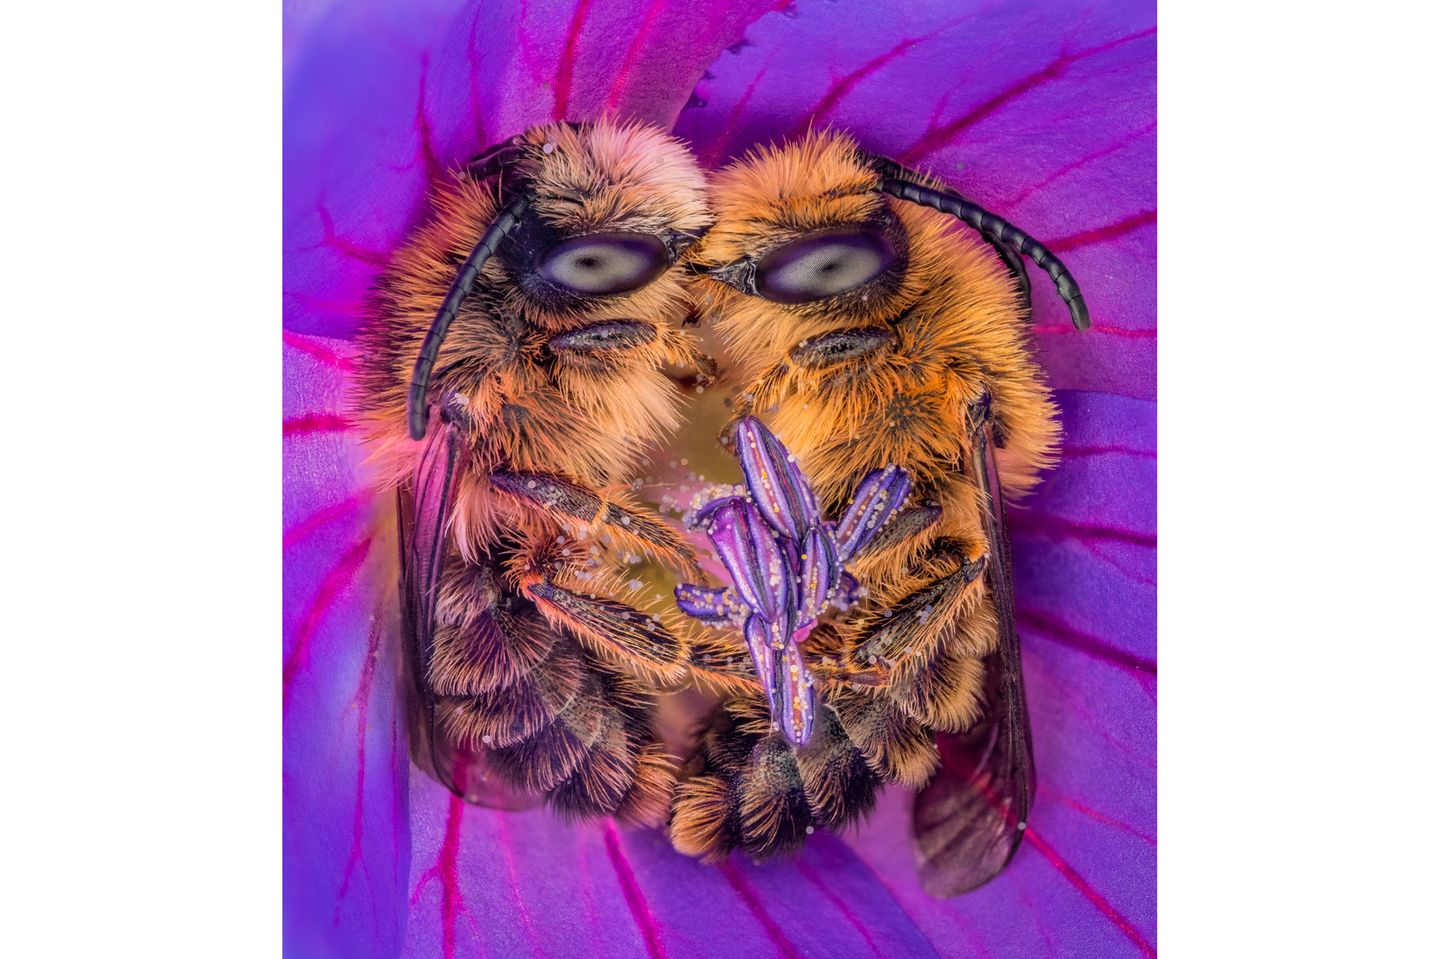 //CUPOTY-© Joris Vegter-Bee Together//  //CREDIT//© Joris Vegter | cupoty.com  //SUBHEAD// Finalist  Name: Joris Vegter  Title: Bee Together  Nationality: Dutch  Occupation: PE teacher  Further info: Instagram: @jornature86, Flickr: Joris Vegter      ‘In 2020 I found a bee sleeping in a flower. I hadn’t seen this kind of behaviour before, so I took a lot of pictures of it. The summer was almost over by then and I didn’t find another sleeping bee that year. In 2021, however, I set myself the goal of finding more bees sleeping in flowers. It took a lot of searching, but I eventually struck gold when I came across these lovely Gold-tailed Melitta bees. The pair were sleeping in such a lovely embrace that it made my heart melt. Many species of wild bee are endangered, so the more we understand and love them the better their chances of survival.’